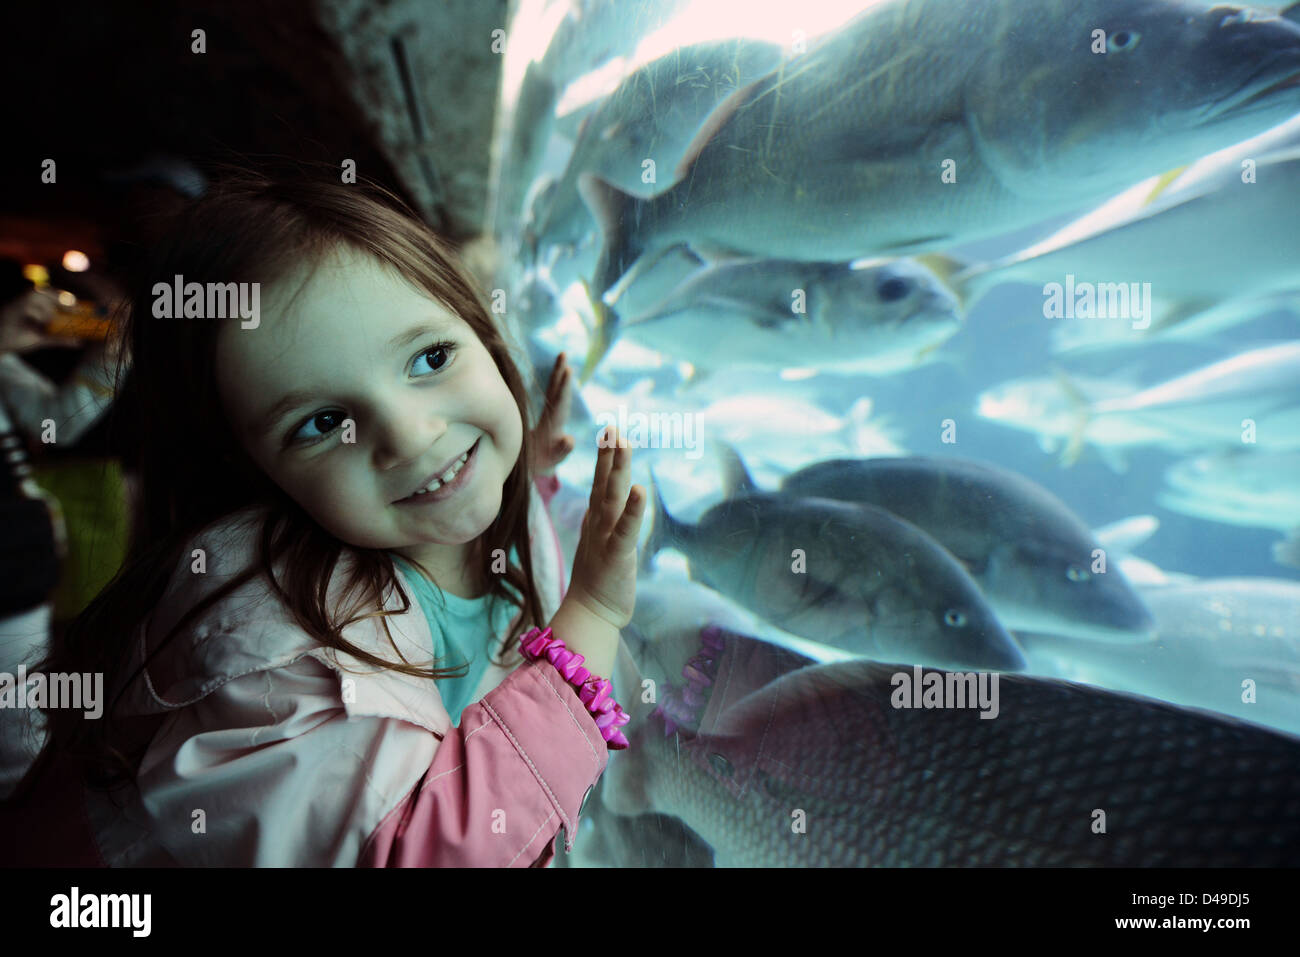 A little girl smiles and gazes in amazement, wonder, through the window of an aquarium as the fishes swimming by. Stock Photo